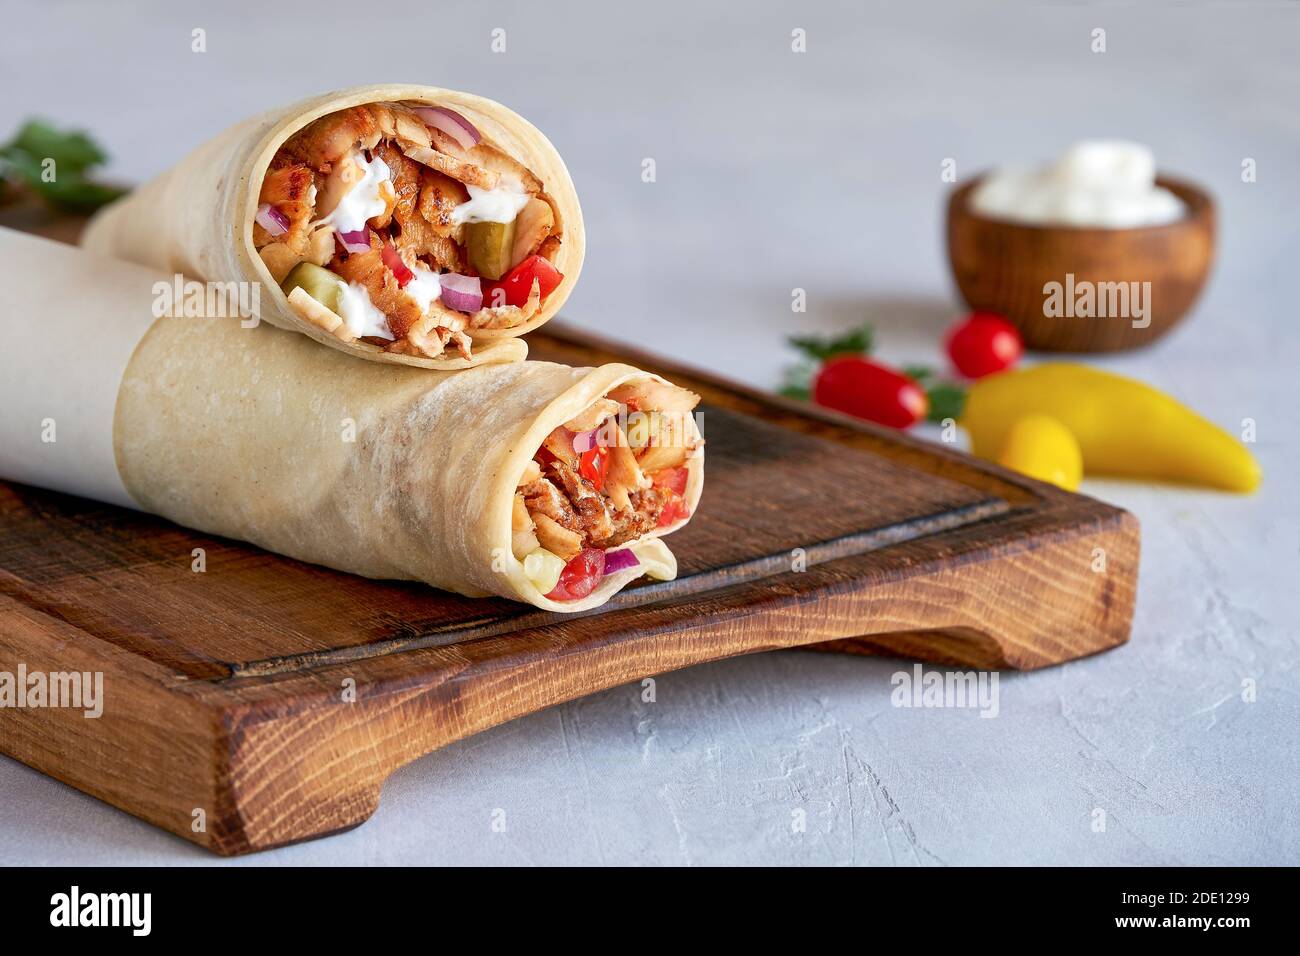 Shawarma with chicken and garlic sauce on wooden board. Closeup Stock Photo